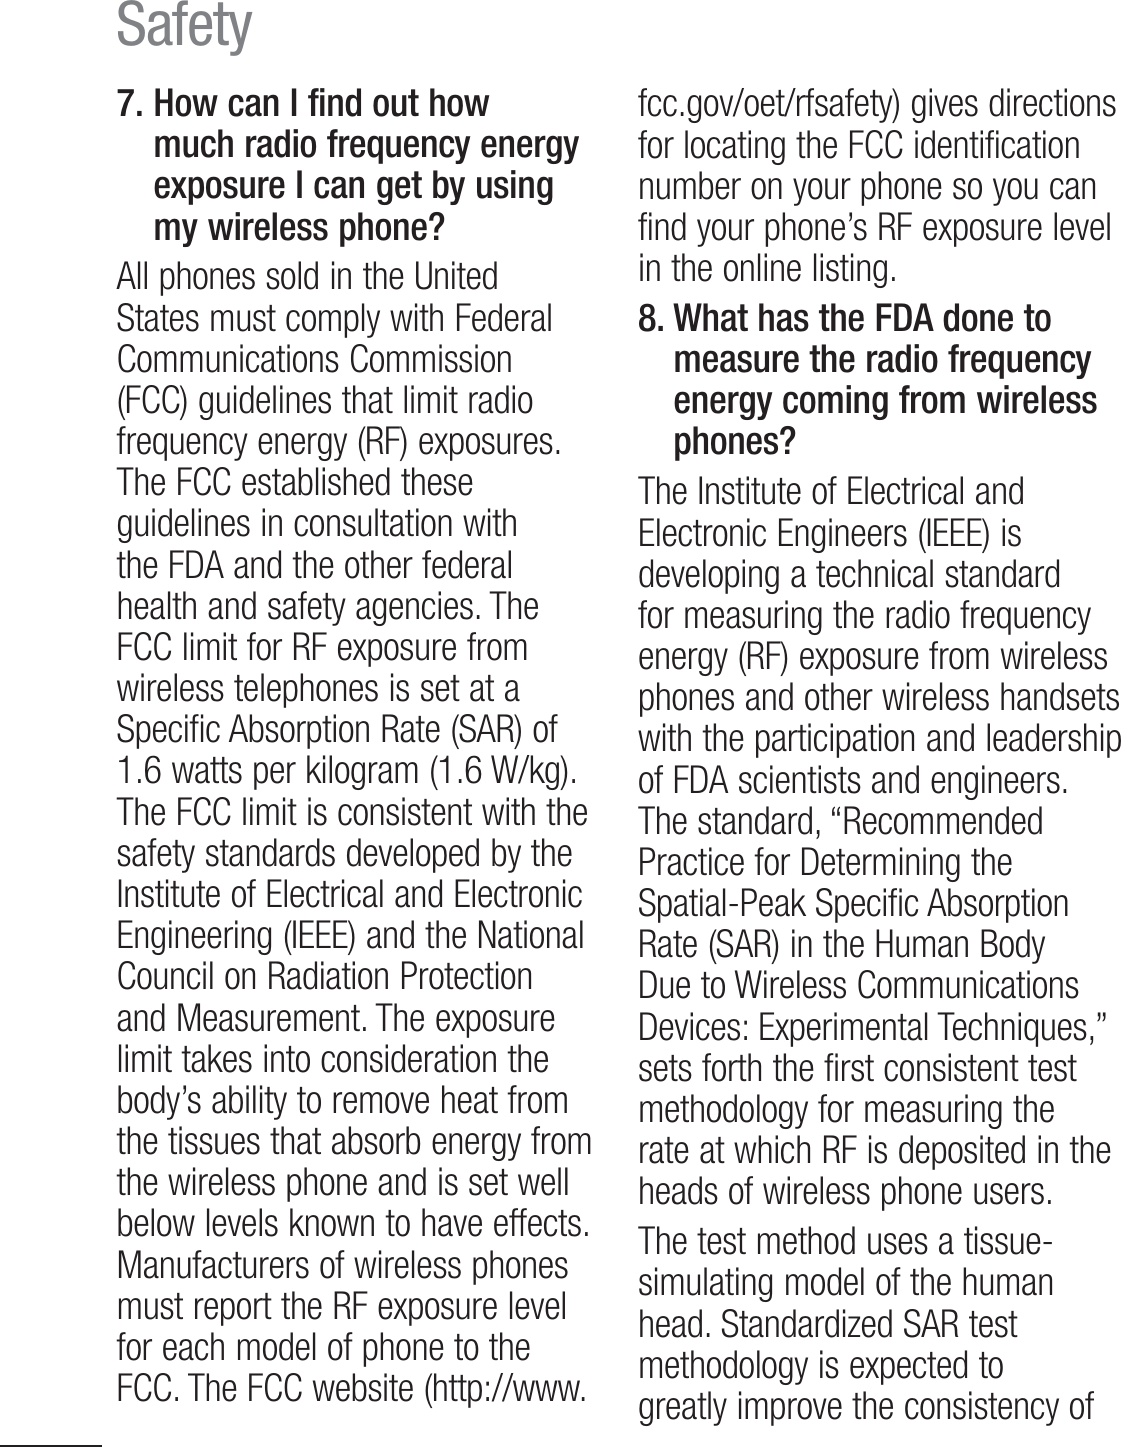 16Safety7.  How can I find out how much radio frequency energy exposure I can get by using my wireless phone?All phones sold in the United States must comply with Federal Communications Commission (FCC) guidelines that limit radio frequency energy (RF) exposures. The FCC established these guidelines in consultation with the FDA and the other federal health and safety agencies. The FCC limit for RF exposure from wireless telephones is set at a Specific Absorption Rate (SAR) of 1.6 watts per kilogram (1.6 W/kg). The FCC limit is consistent with the safety standards developed by the Institute of Electrical and Electronic Engineering (IEEE) and the National Council on Radiation Protection and Measurement. The exposure limit takes into consideration the body’s ability to remove heat from the tissues that absorb energy from the wireless phone and is set well below levels known to have effects. Manufacturers of wireless phones must report the RF exposure level for each model of phone to the FCC. The FCC website (http://www.fcc.gov/oet/rfsafety) gives directions for locating the FCC identification number on your phone so you can find your phone’s RF exposure level in the online listing.8.  What has the FDA done to measure the radio frequency energy coming from wireless phones?The Institute of Electrical and Electronic Engineers (IEEE) is developing a technical standard for measuring the radio frequency energy (RF) exposure from wireless phones and other wireless handsets with the participation and leadership of FDA scientists and engineers. The standard, “Recommended Practice for Determining the Spatial-Peak Specific Absorption 3BUF4&quot;3JOUIF)VNBO#PEZDue to Wireless Communications Devices: Experimental Techniques,” sets forth the first consistent test methodology for measuring the rate at which RF is deposited in the heads of wireless phone users.The test method uses a tissue-simulating model of the human head. Standardized SAR test methodology is expected to greatly improve the consistency of 